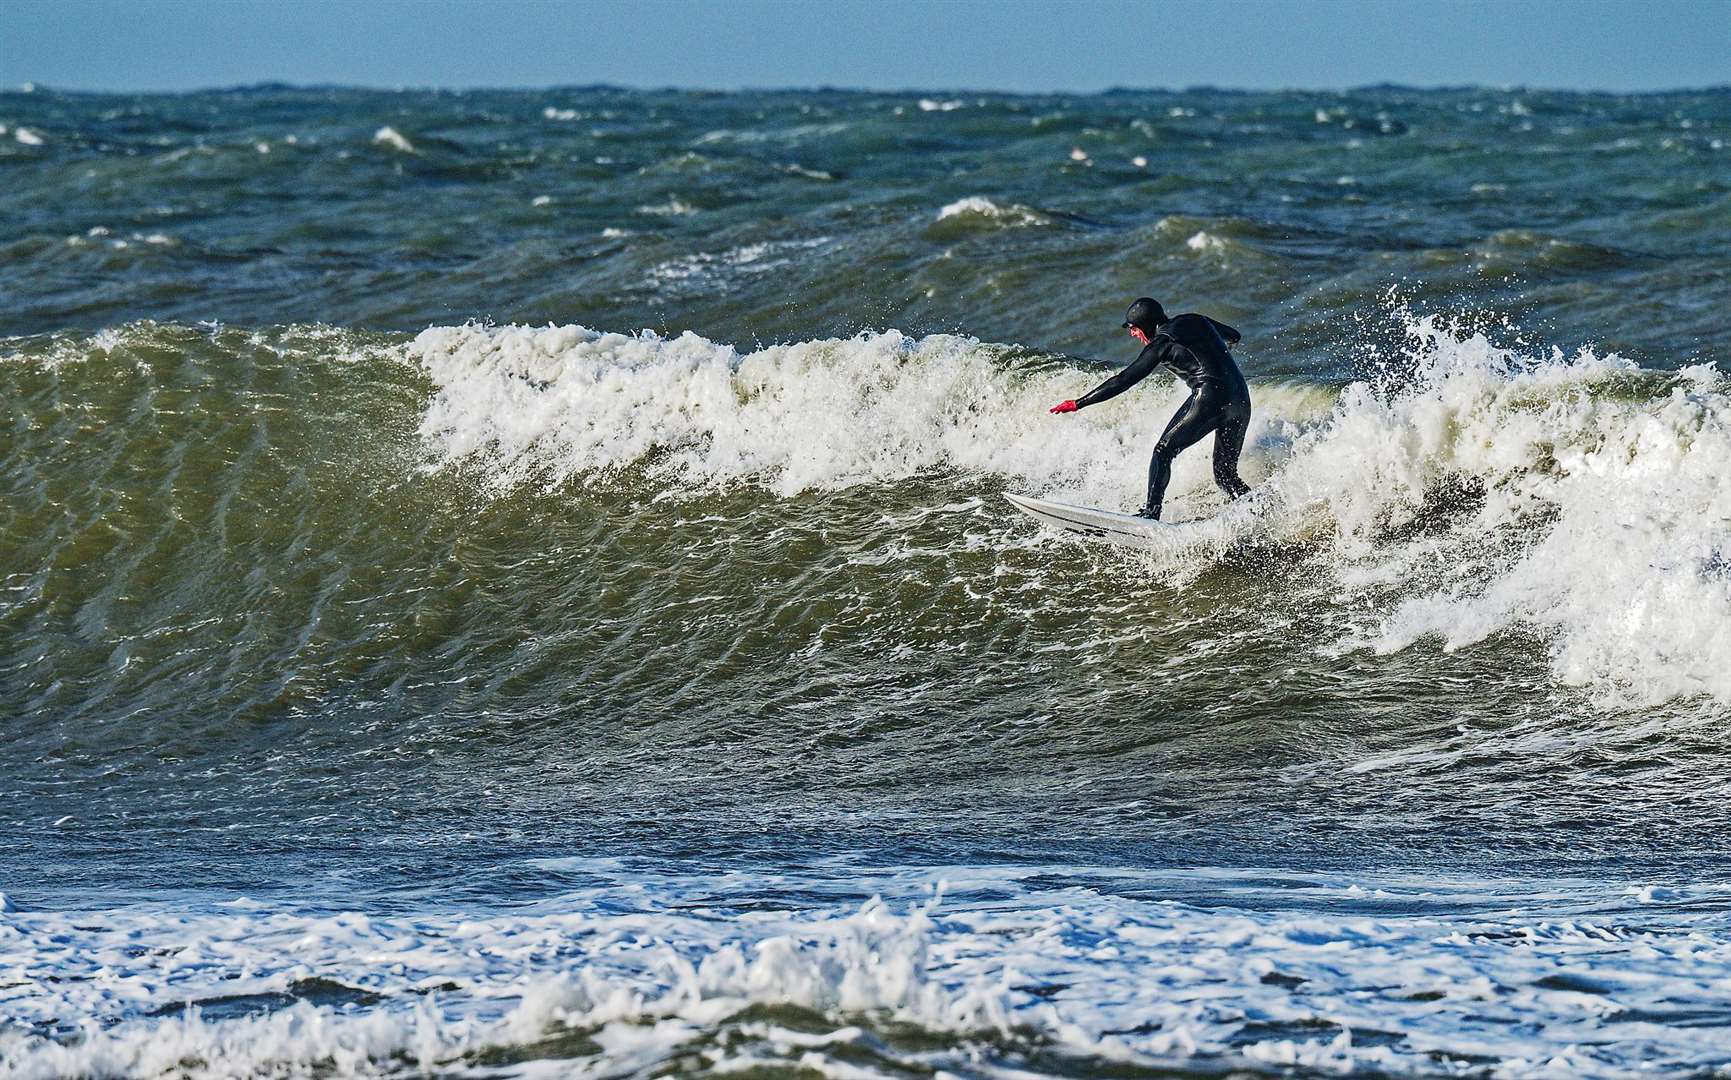 Riding the waves. Picture: Mike Sutherland